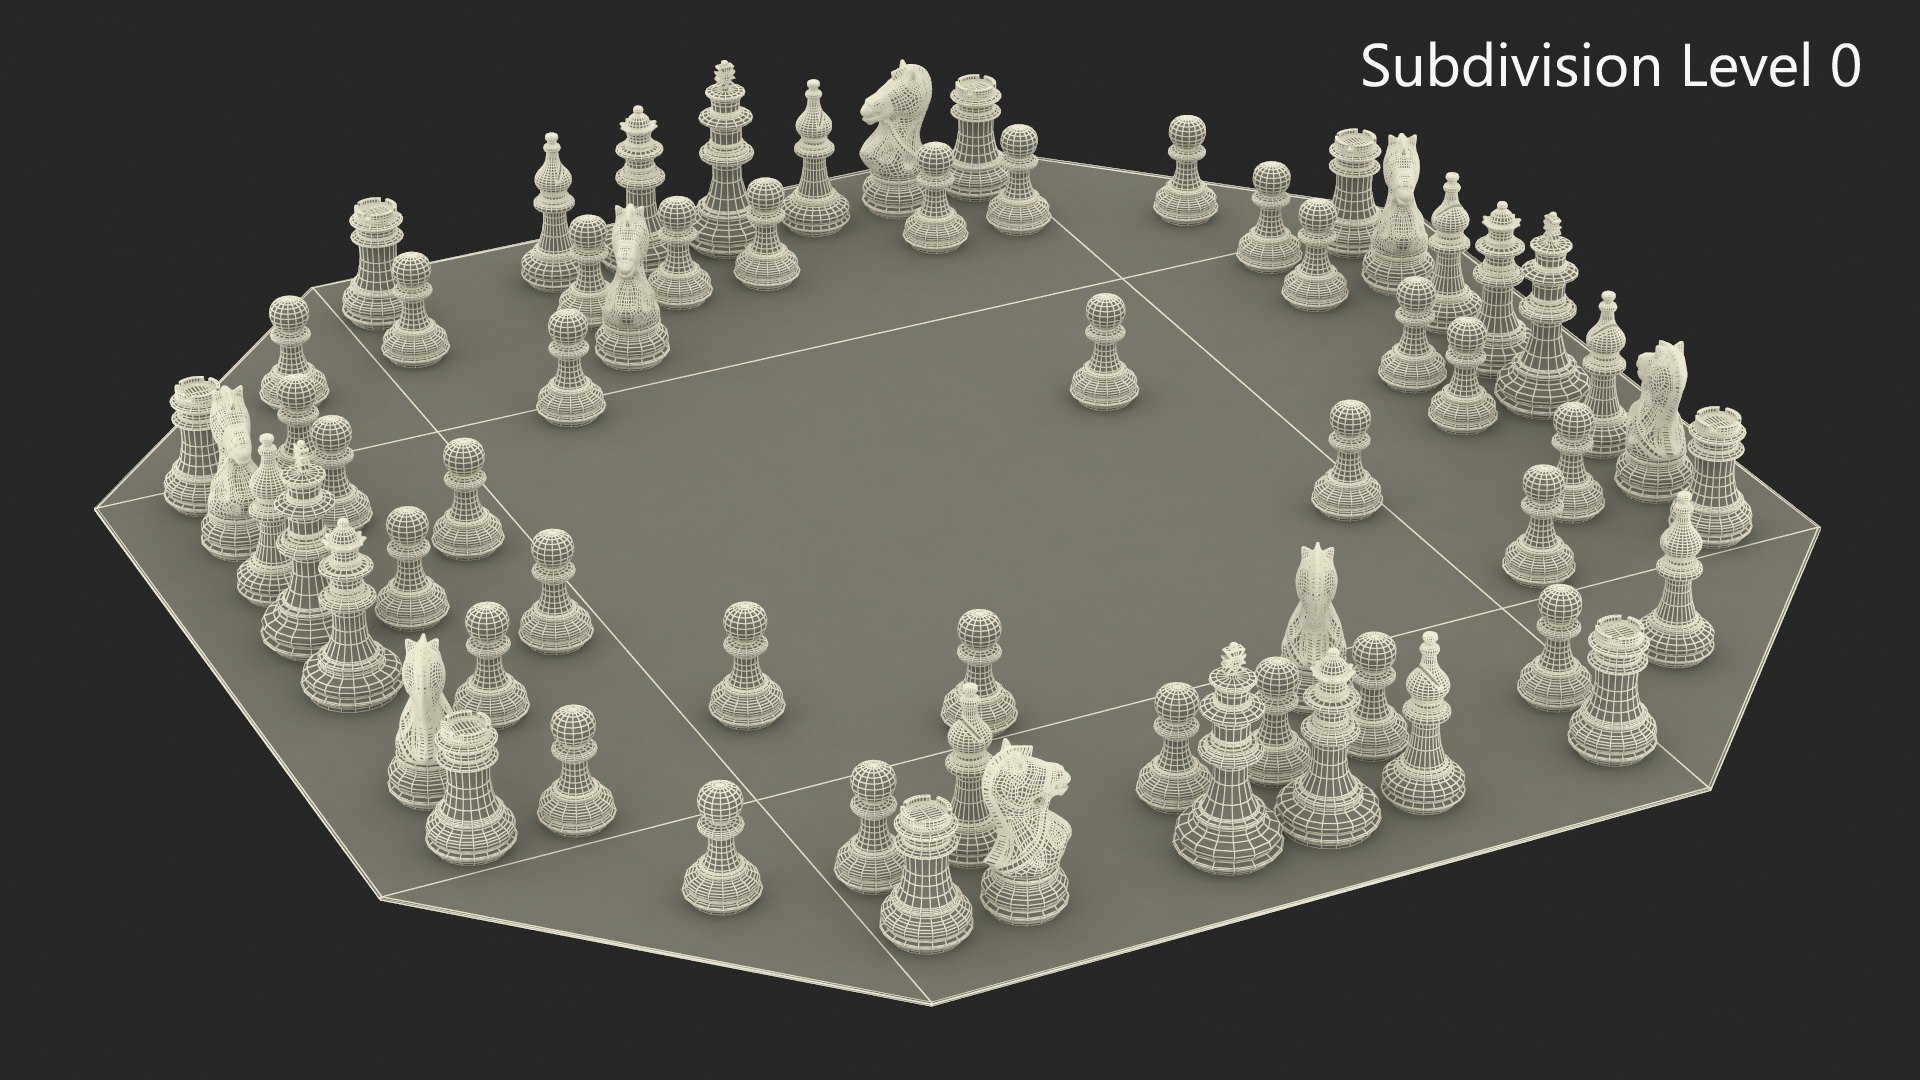 Titans of Chess for render export mockup various materials free 3D model